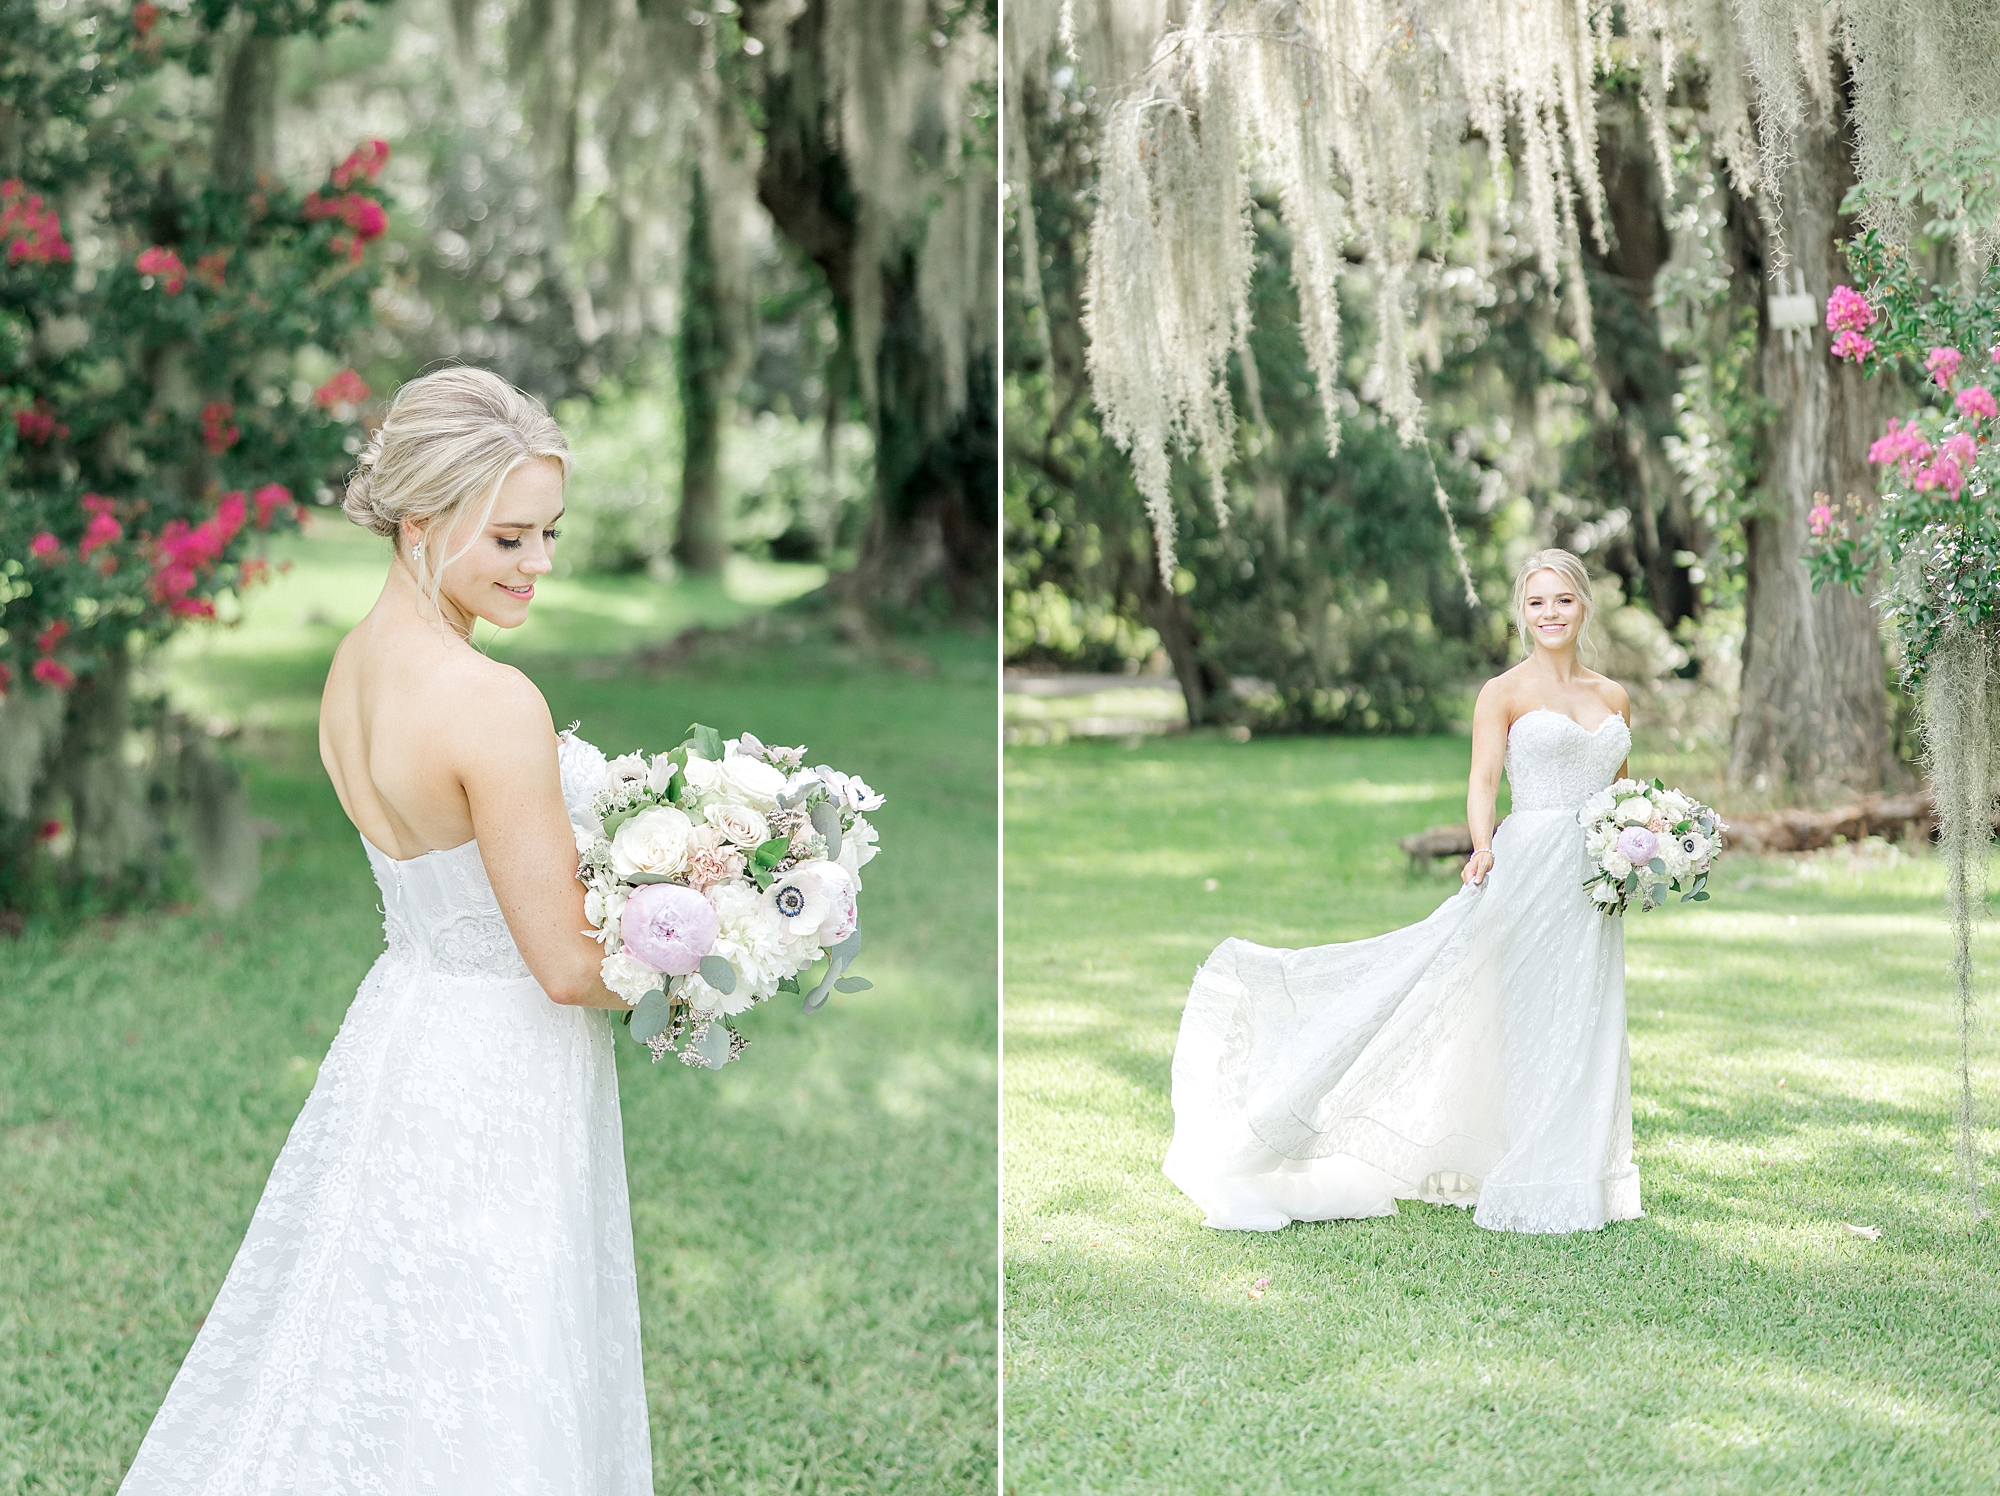 Summer Carriage House Wedding at Magnolia Plantation and Gardens